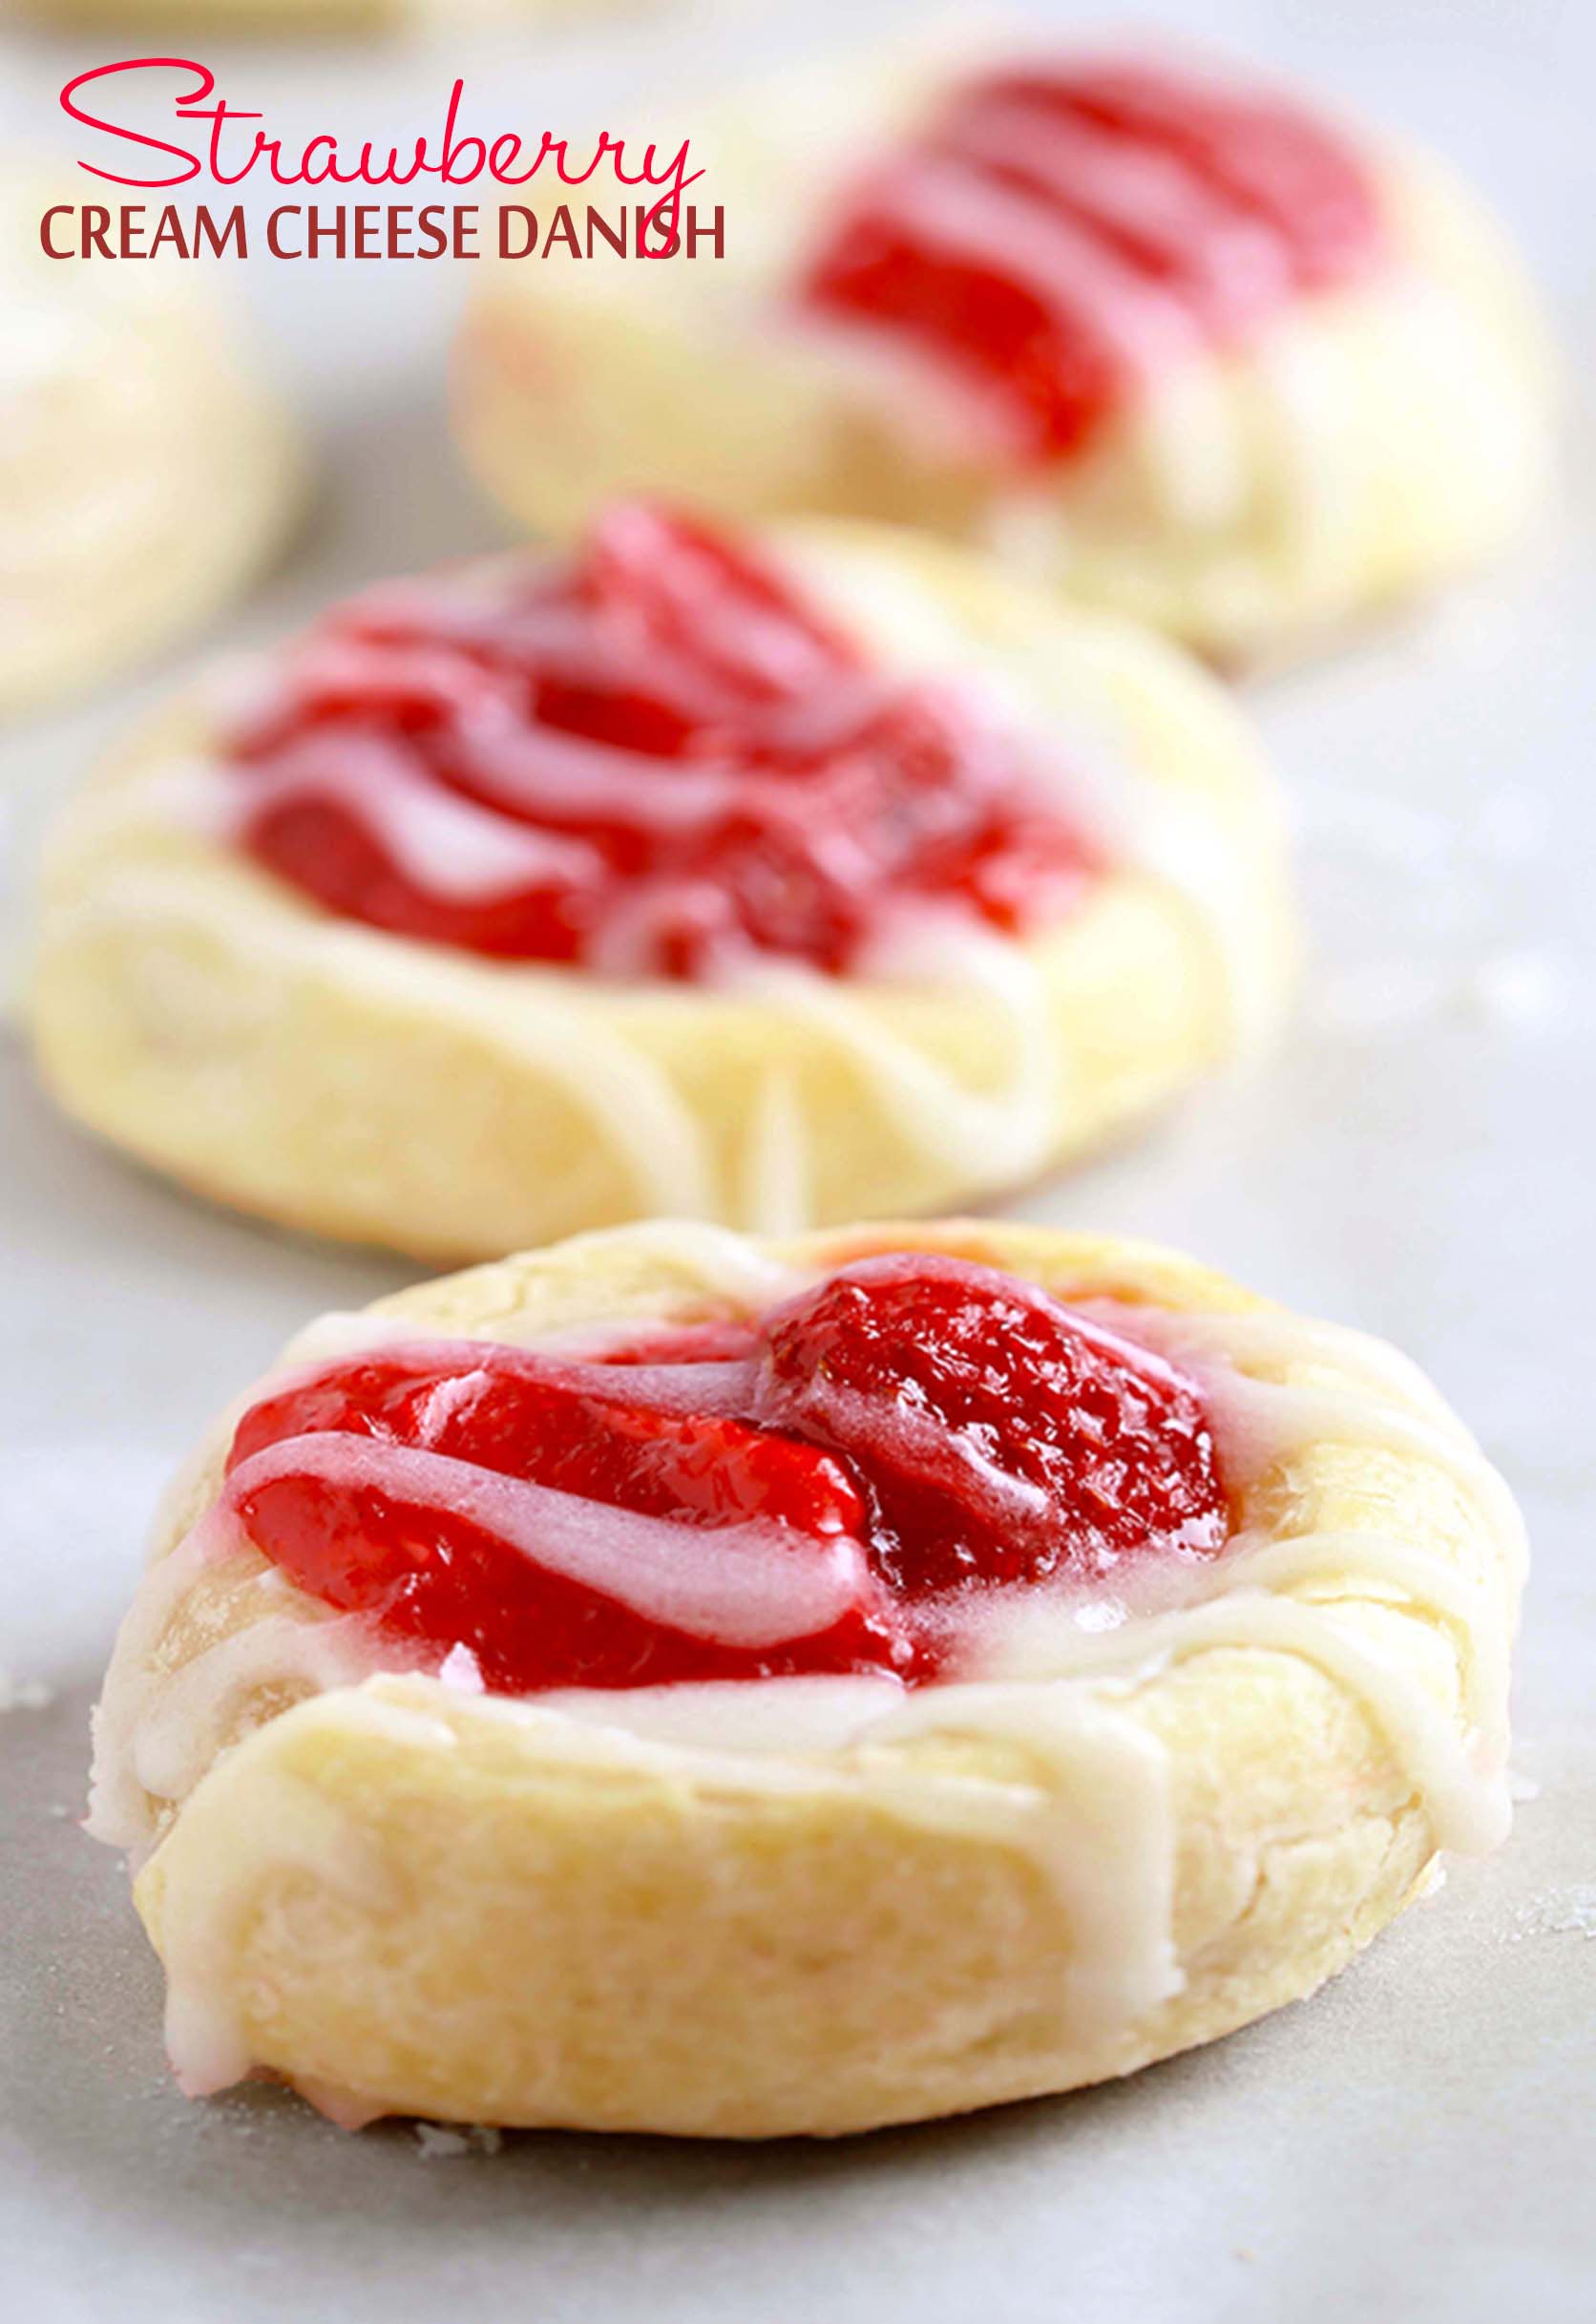 Who can resist flaky crescent rolls combined with a sweet cream cheese and strawberry filling? These strawberry cream cheese danish are so addictive!